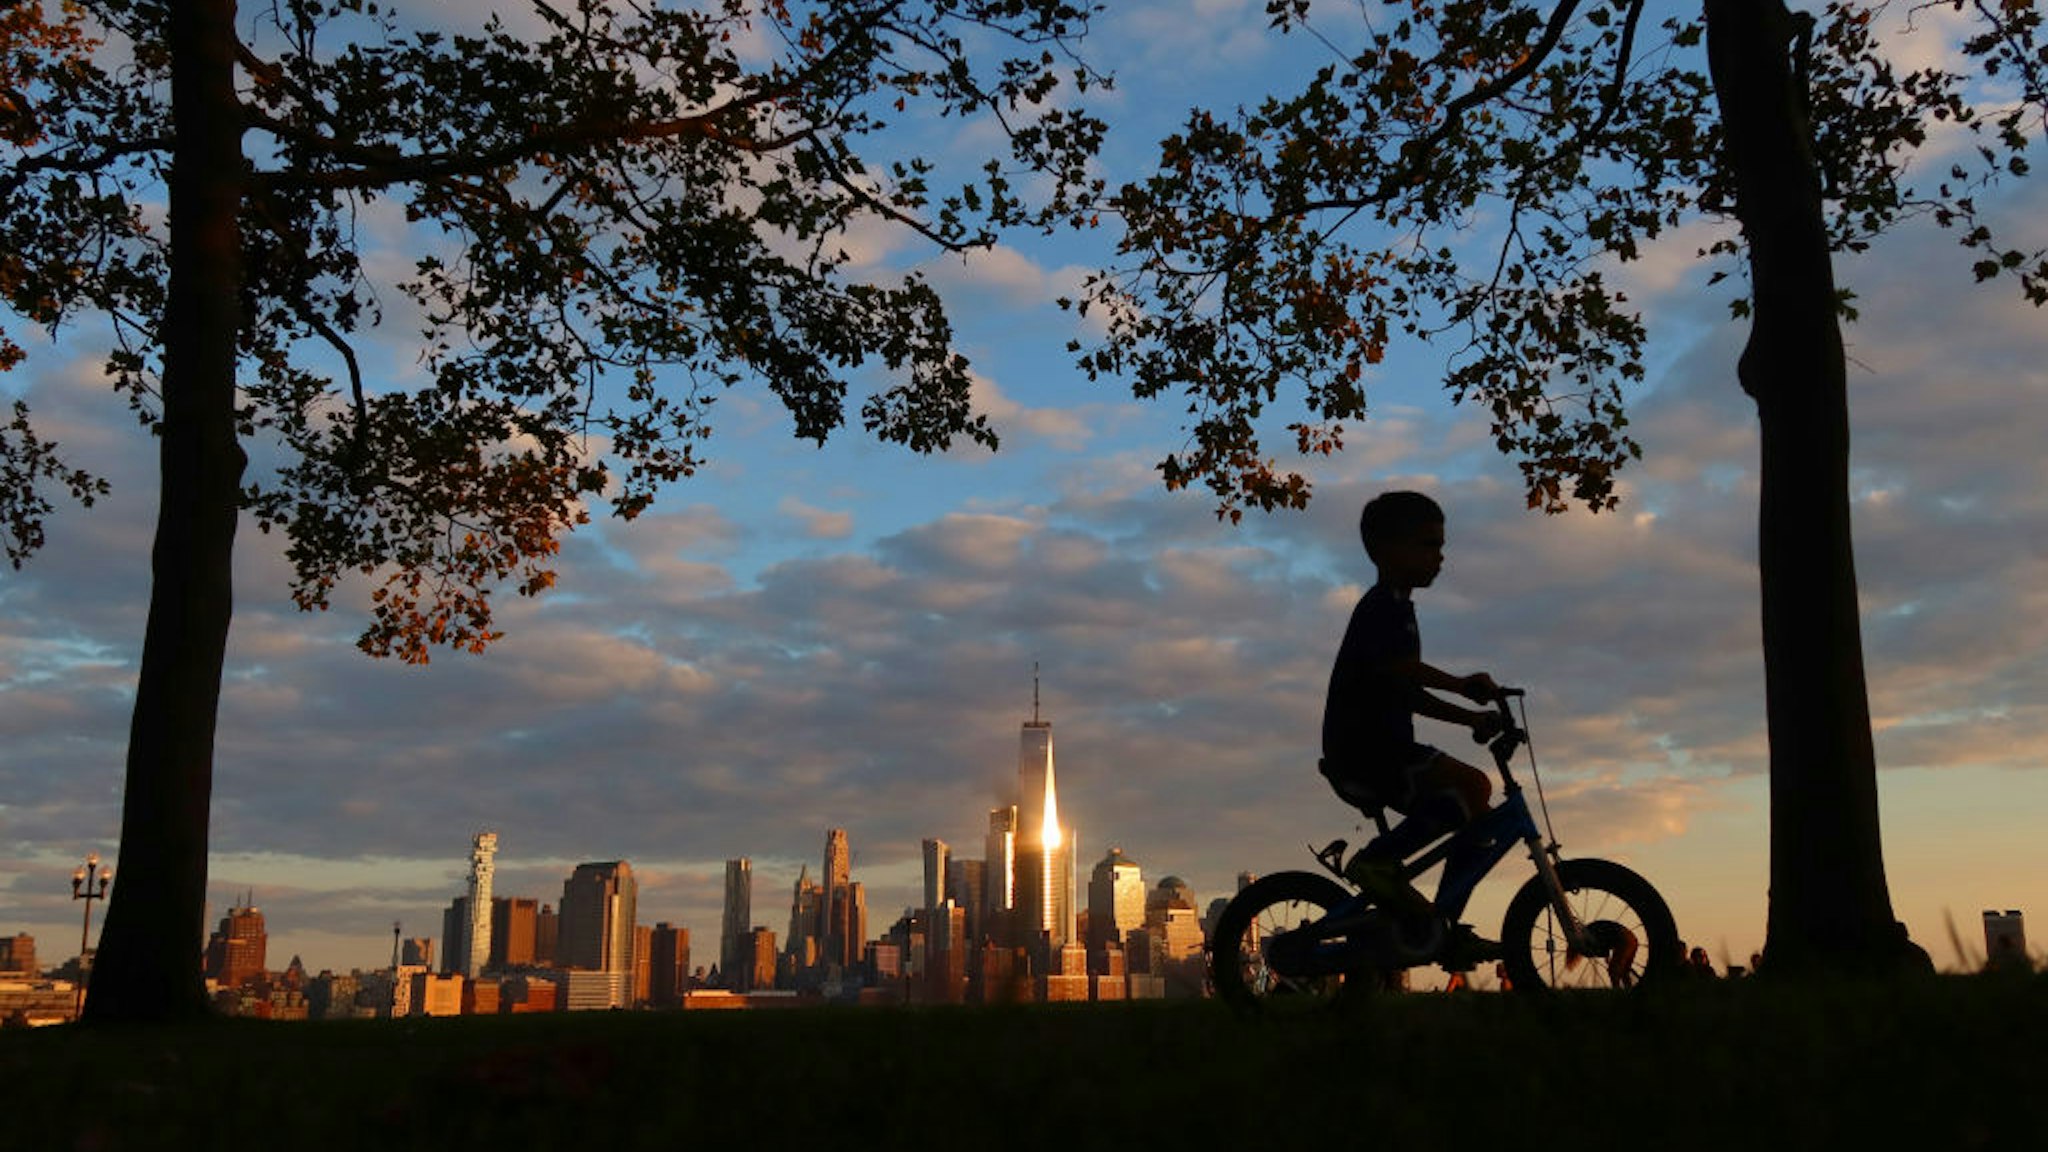 HOBOKEN, NJ - OCTOBER 5: A child rides his bicycle through the park on Pier A as the sun sets on lower Manhattan and One World Trade Center in New York City on October 5, 2020 in Hoboken, New Jersey. (